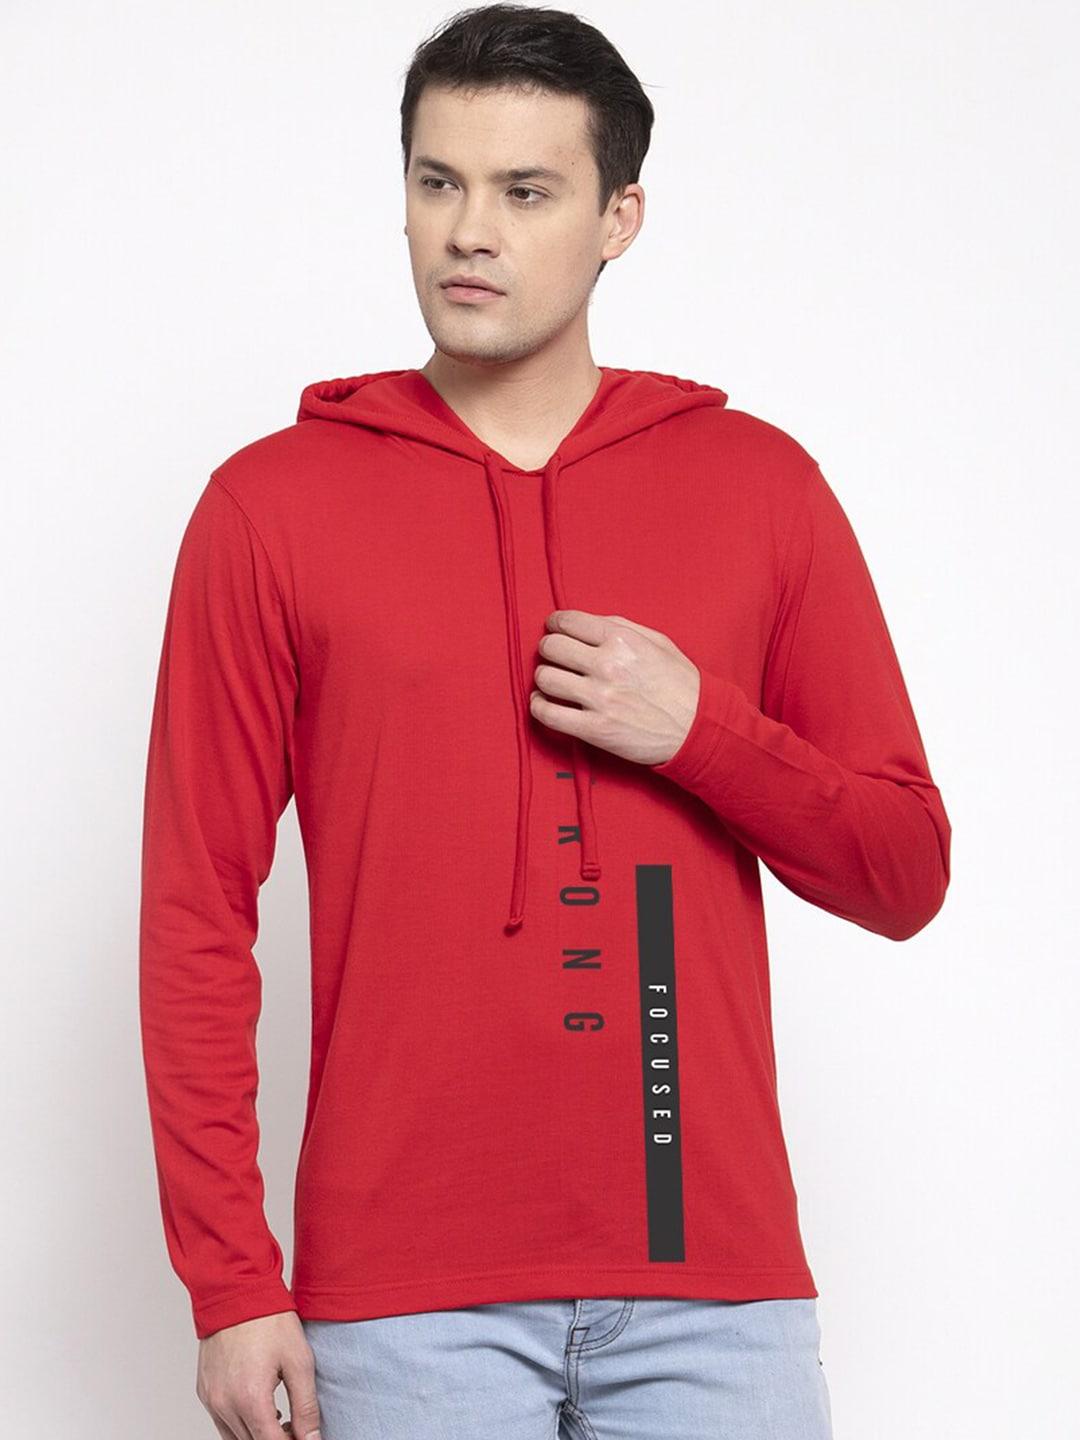 friskers-men-red-typography-printed-hooded-t-shirt